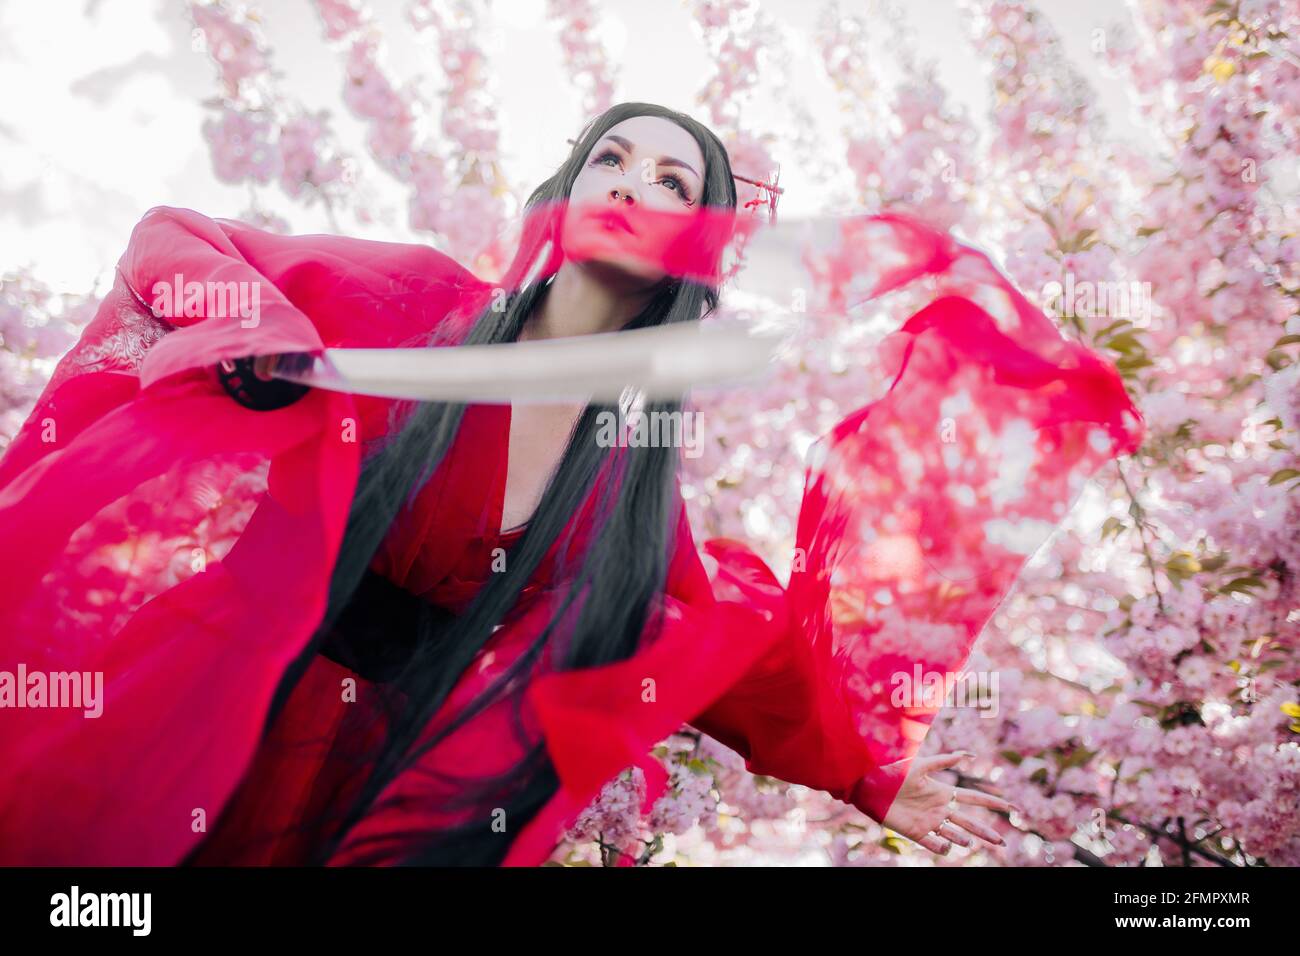 Young woman portrays geisha dressed traditional kimono with Japanese samurai sword in her hand against background of blooming sakura trees. Backlight. Stock Photo